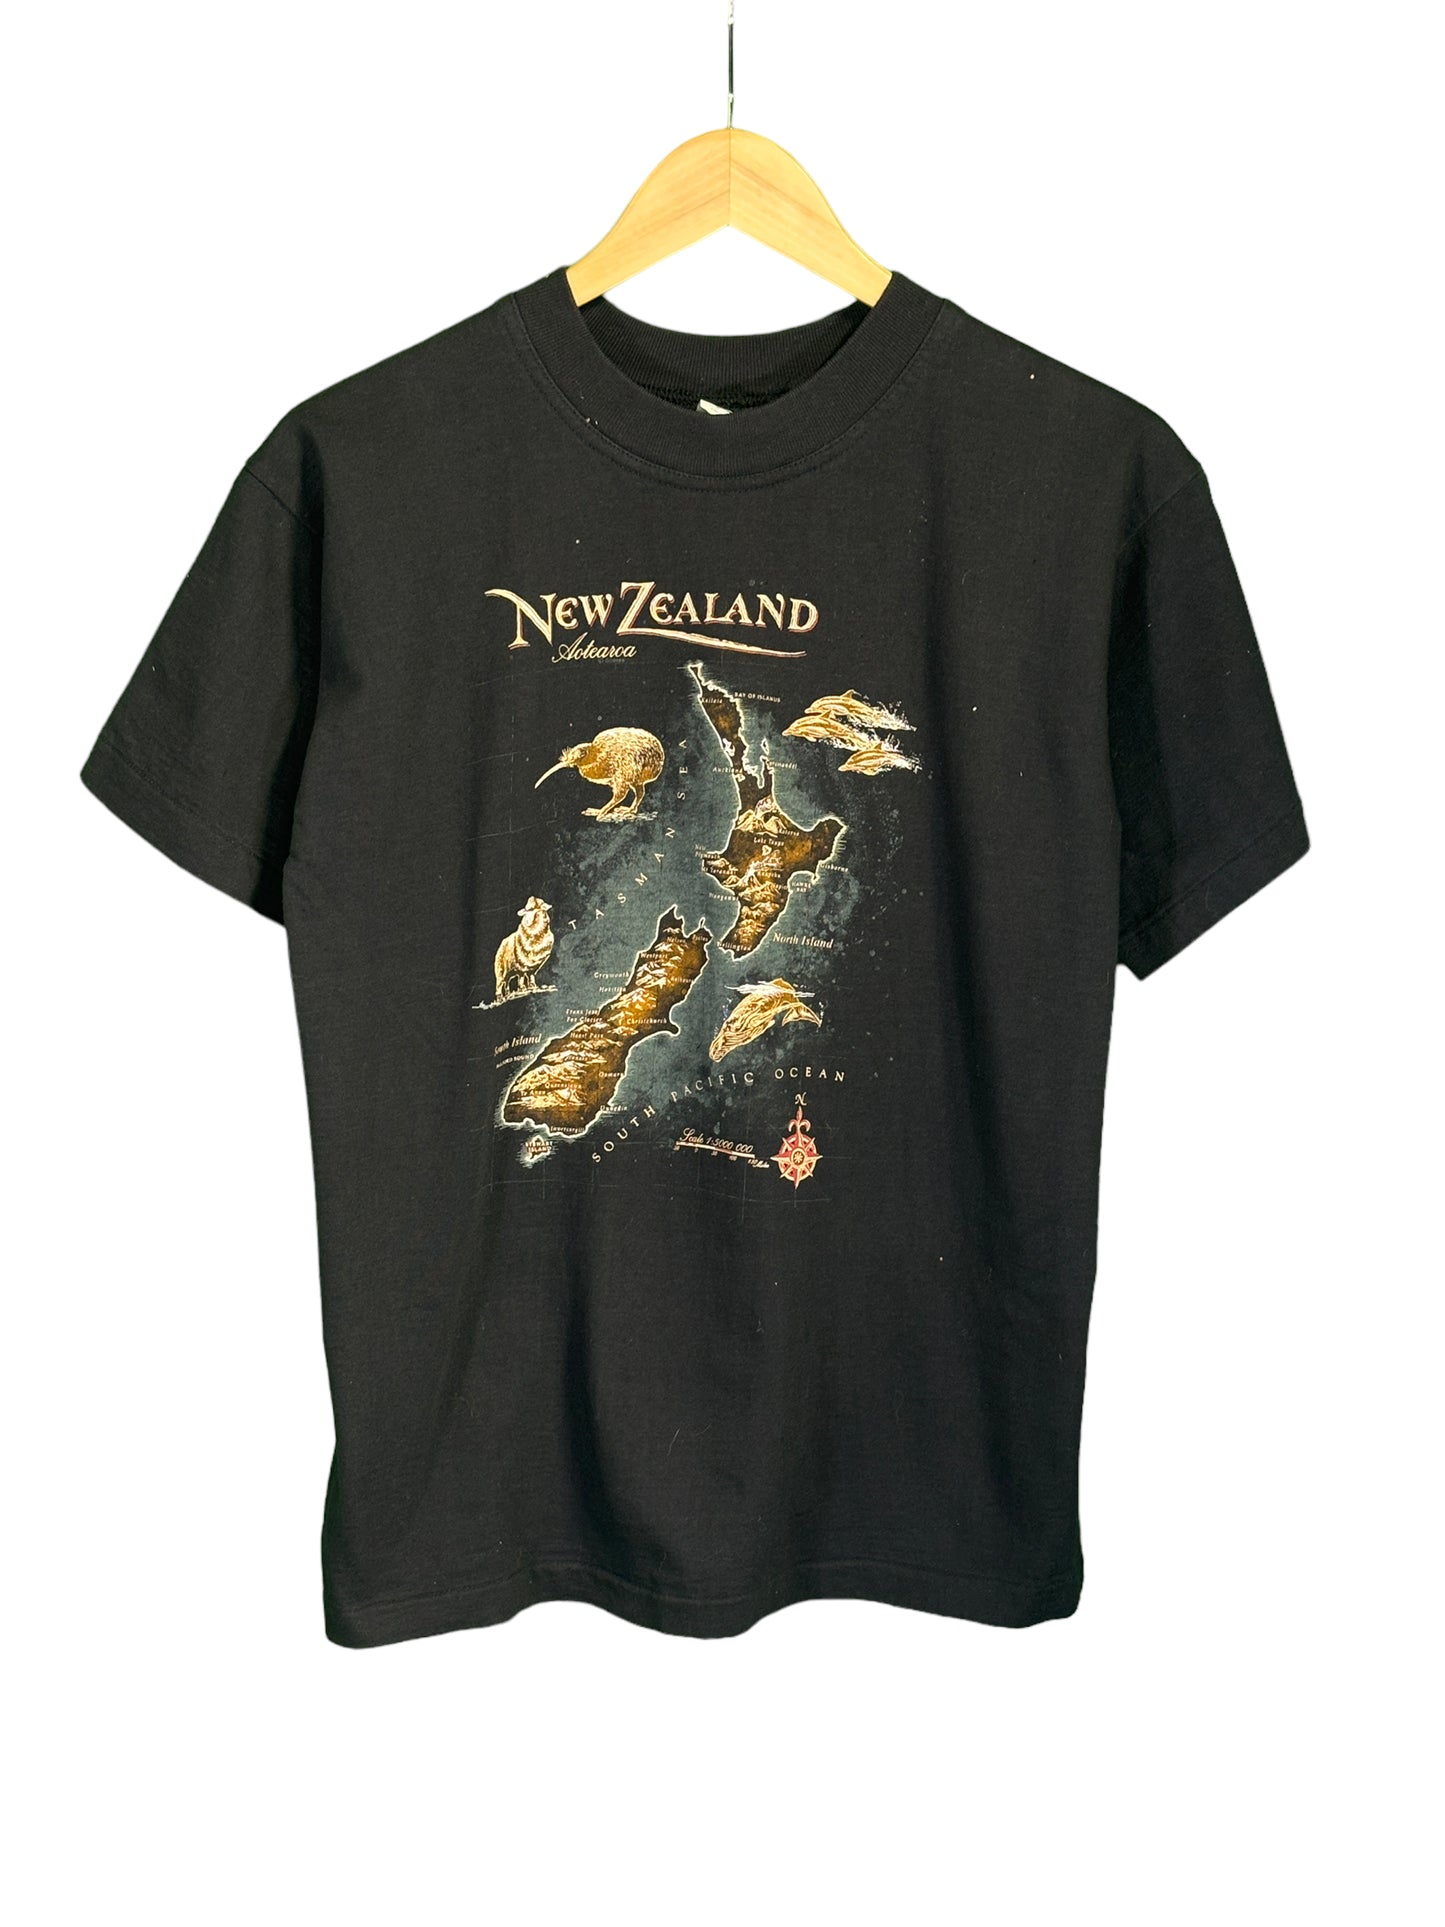 Vintage New Zealand Destination Big Graphic Tee Size Small